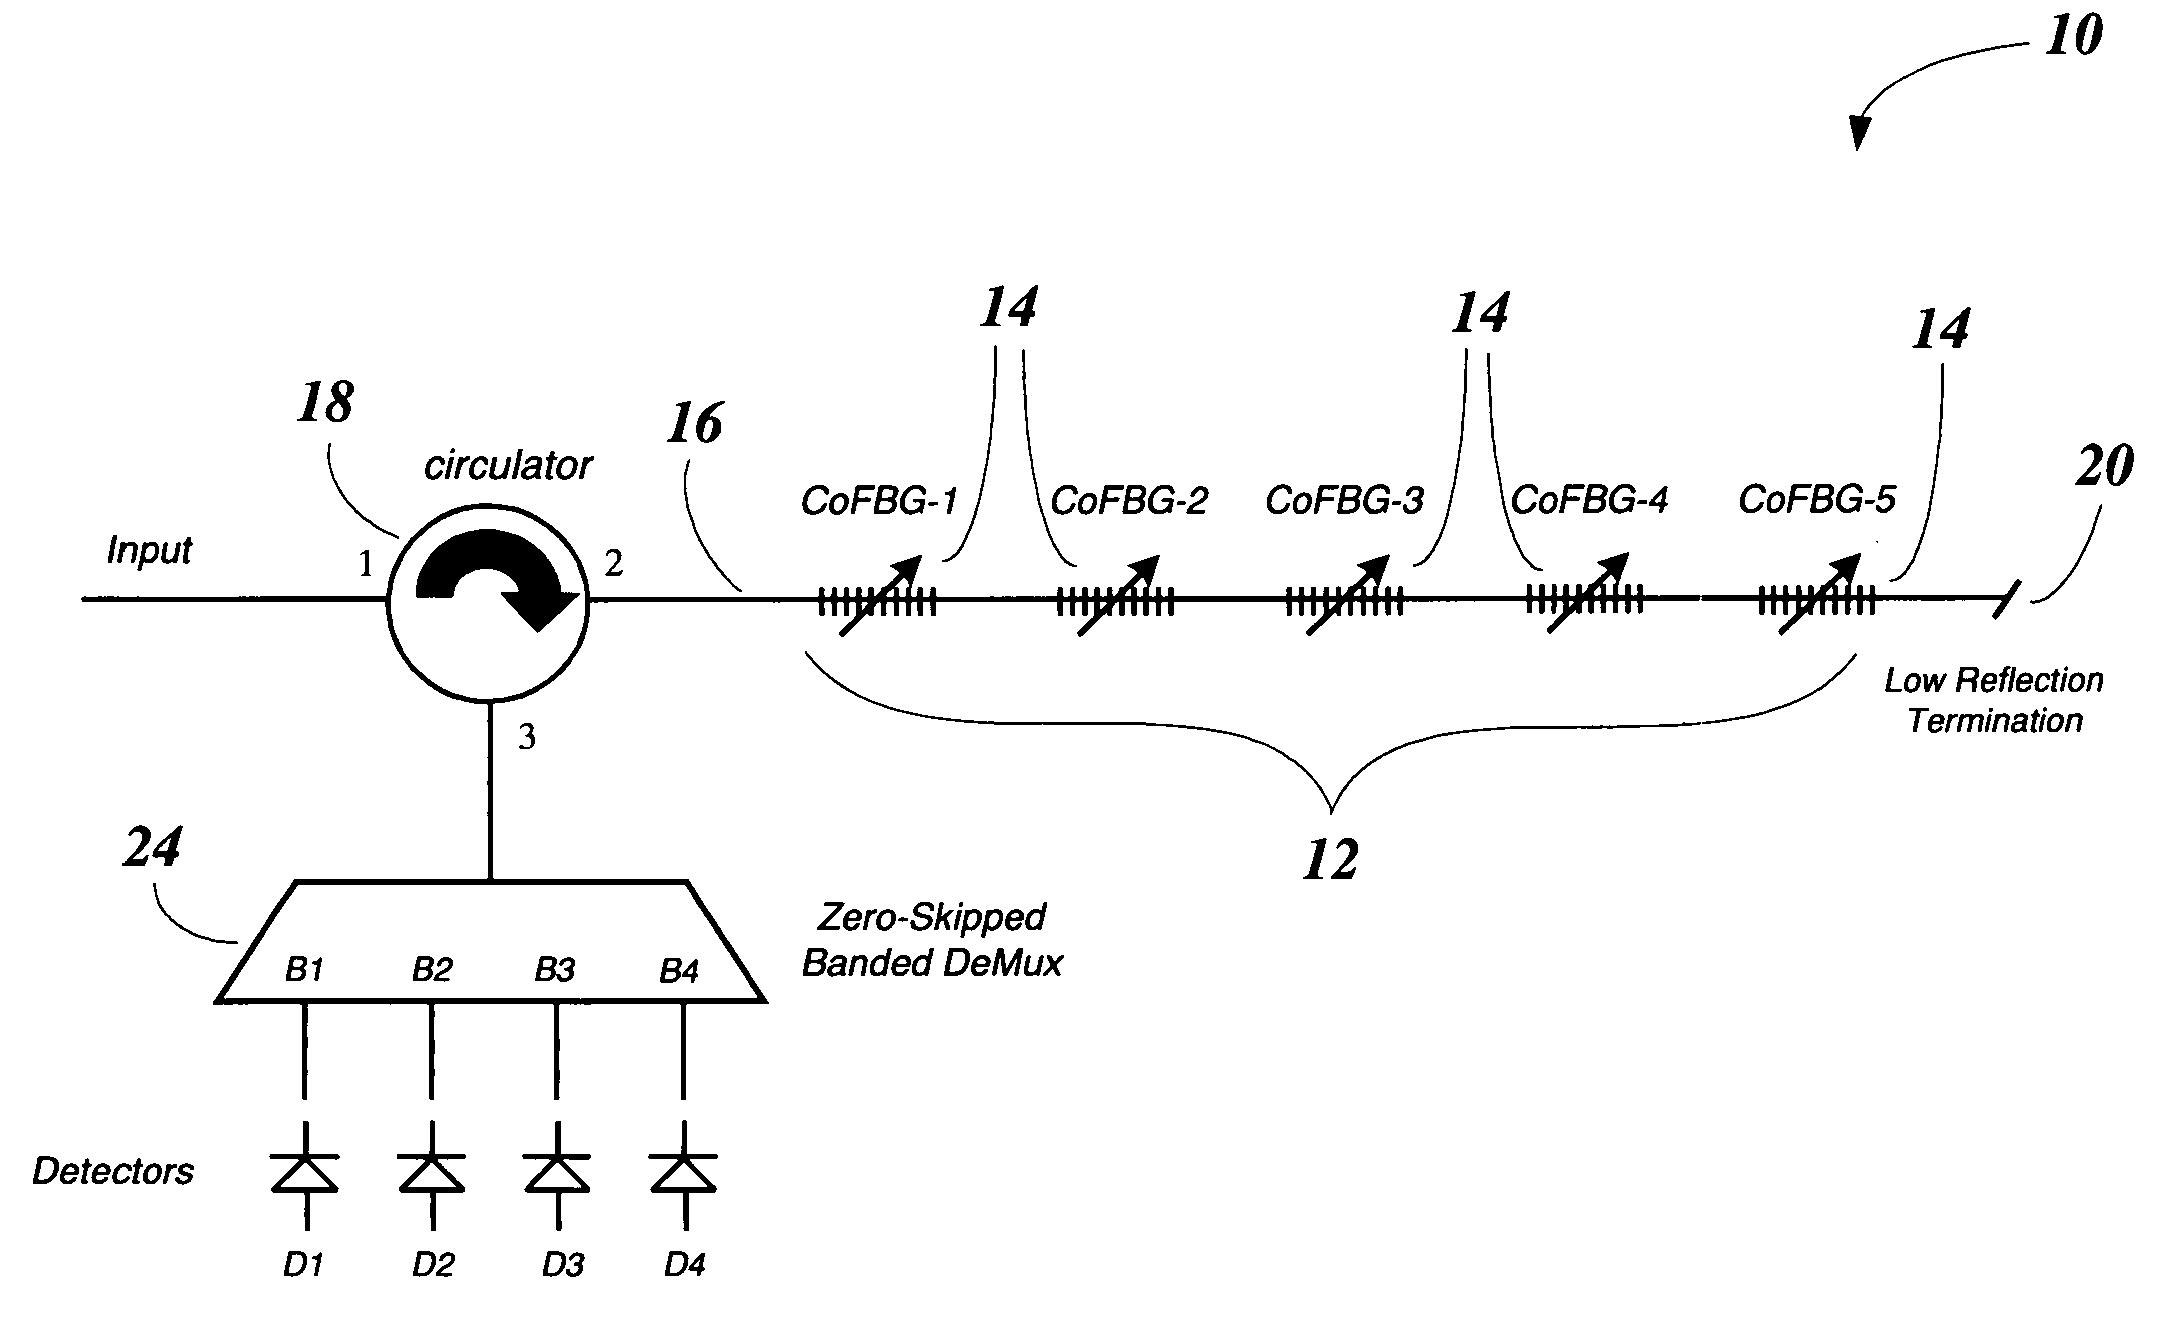 Optical performance monitor using co-located switchable fiber bragg grating array